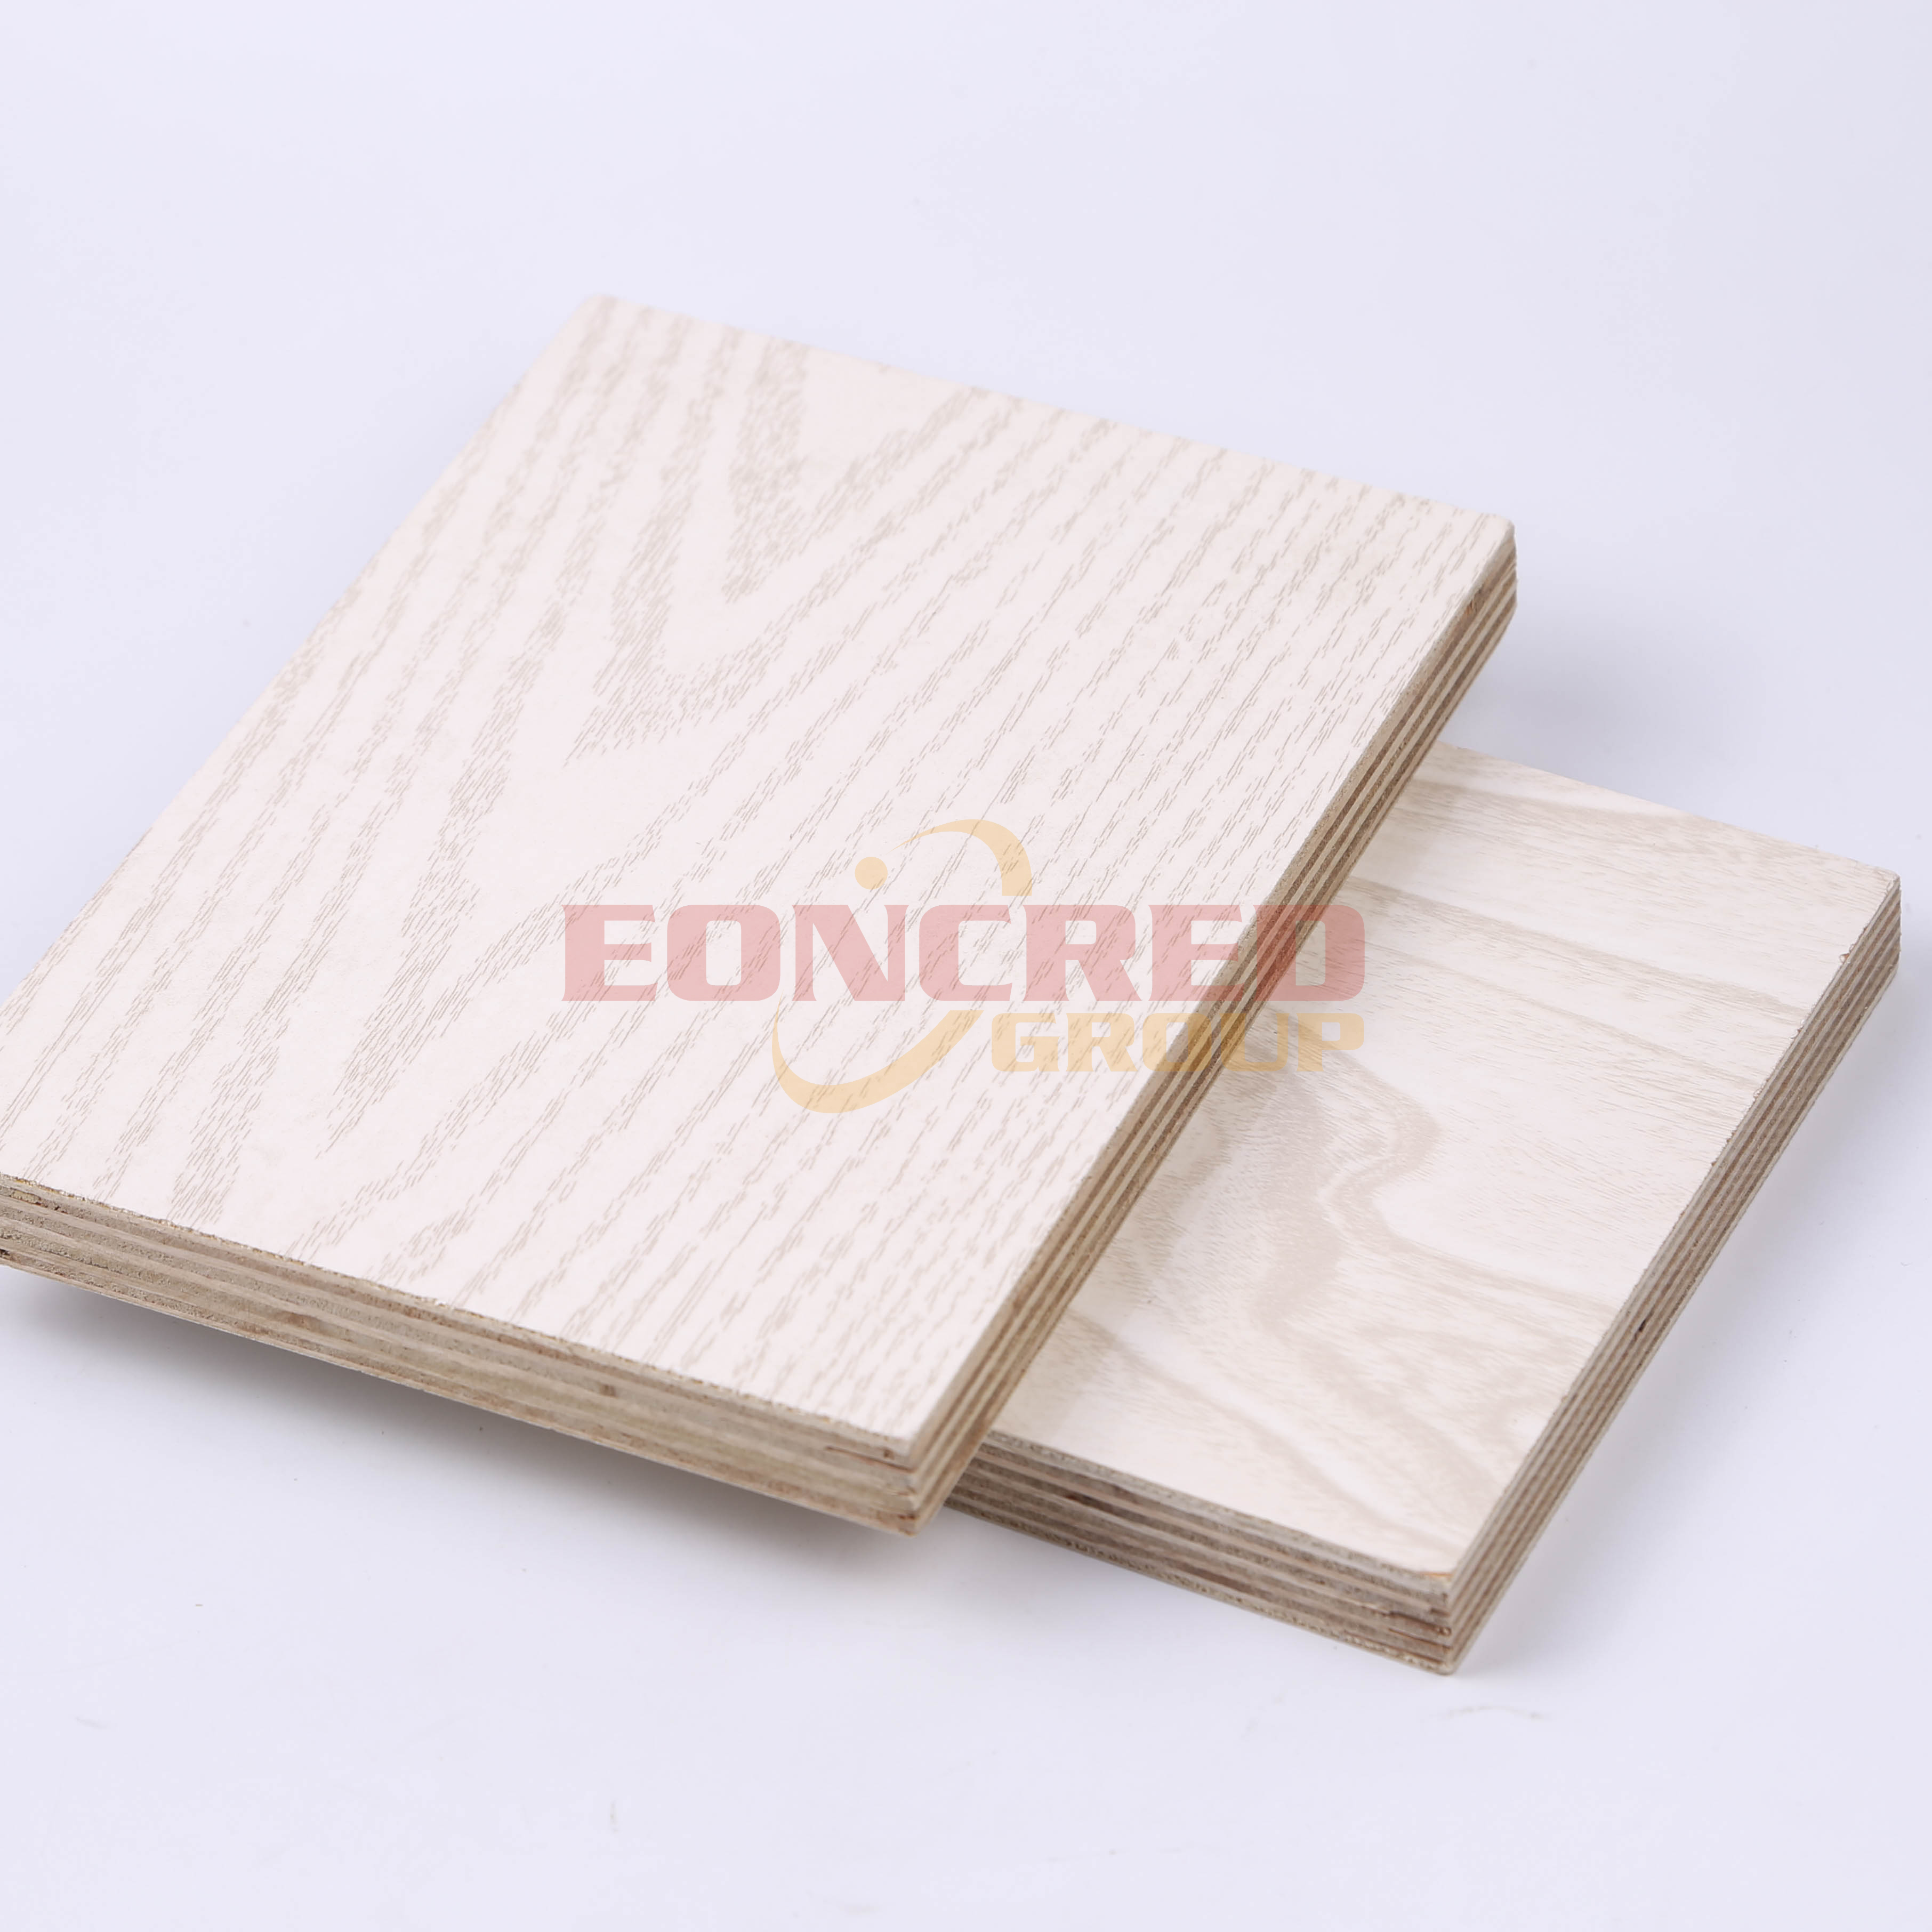 Double Laminated Melamine Marine Plywood for Sale from China manufacturer - Eoncred Group